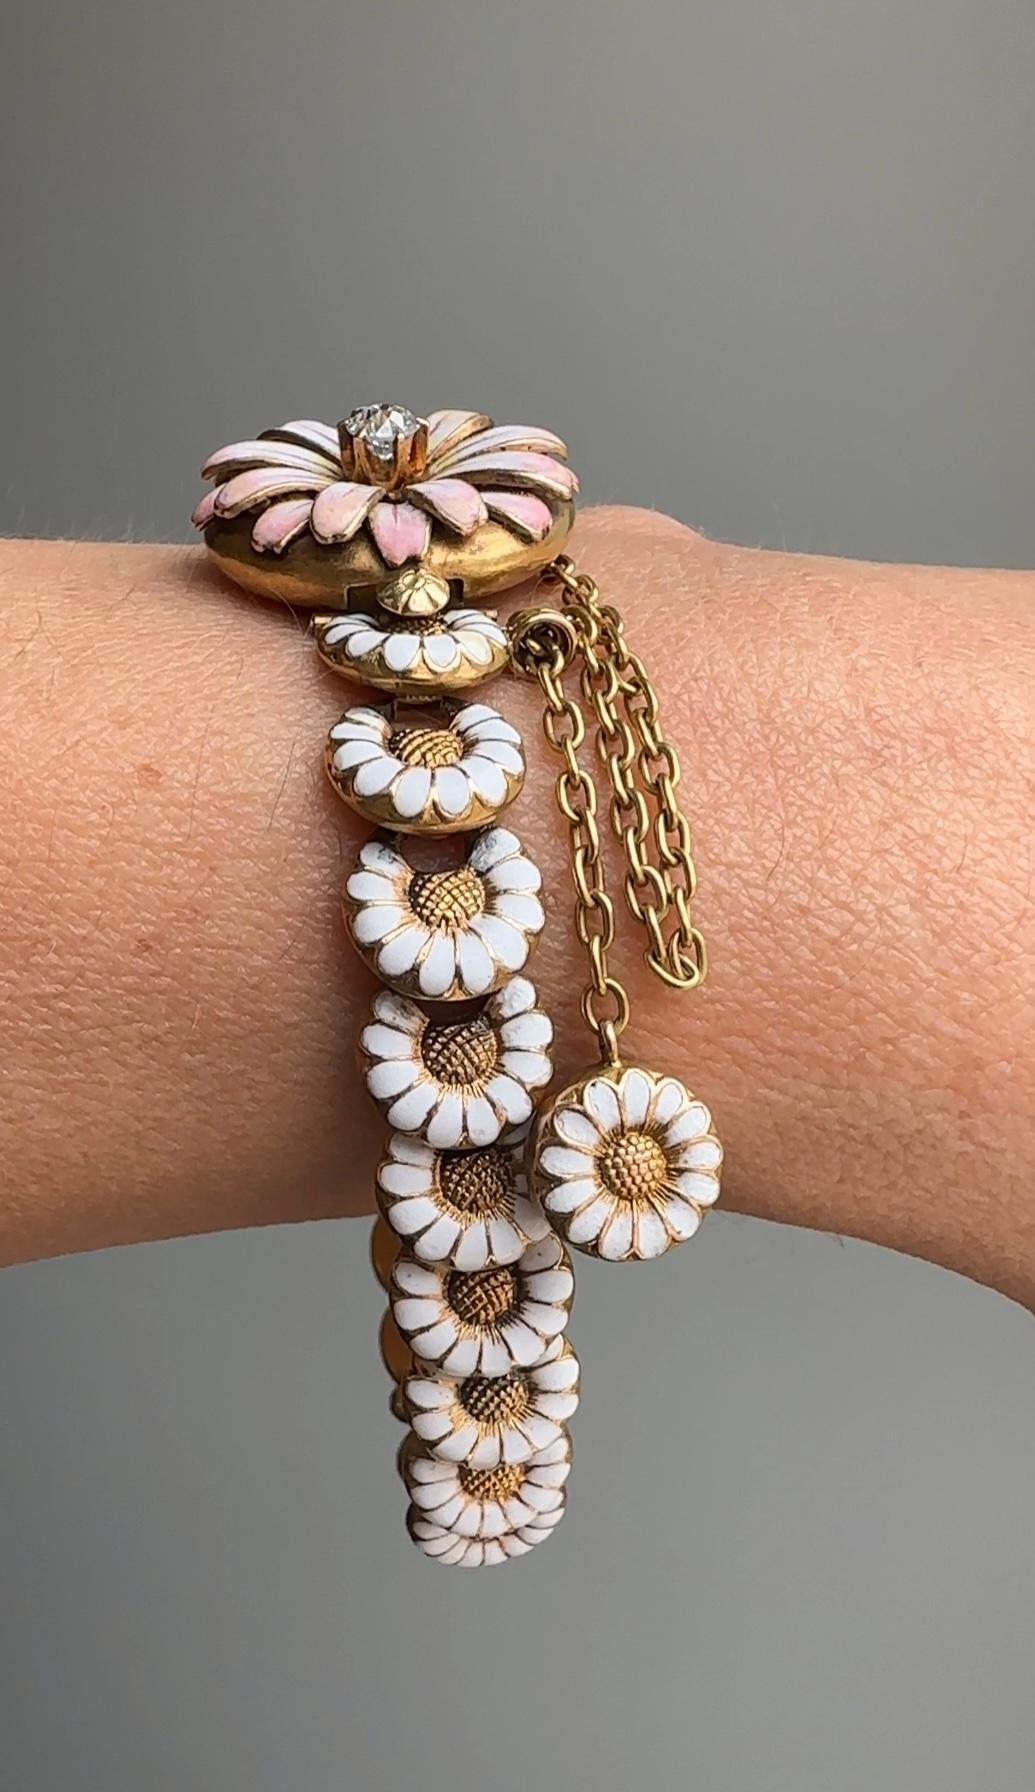 Utterly romantic and exceptionally rare - this delightful late 19th century bracelet is like a is a summer wreath of daisies to wear around your wrist. Masterfully modeled in 18 karat gold, the daisy centerpiece / clasp is set with a single